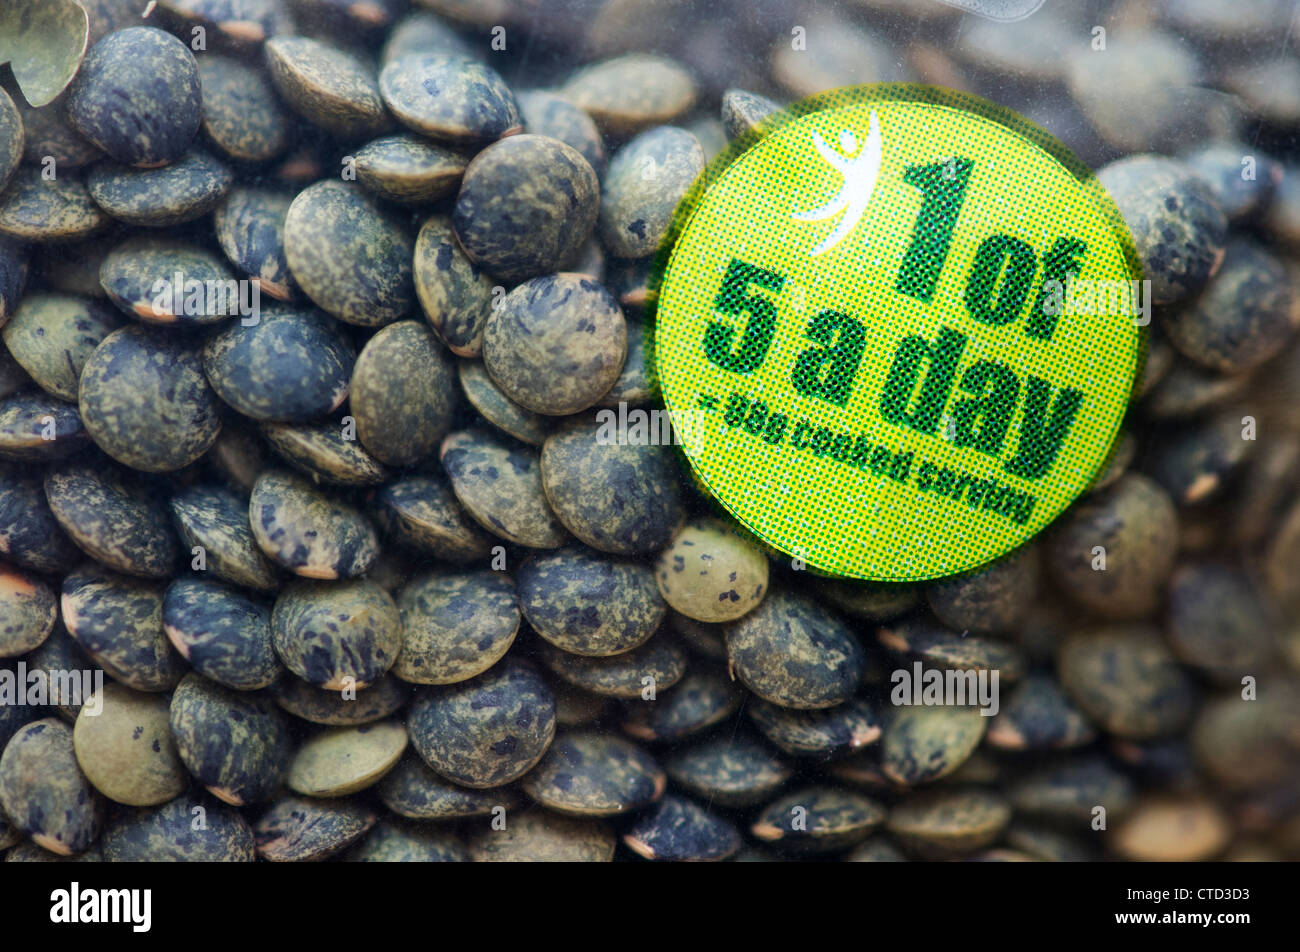 1 of your 5 a day label on a packet of green lentils Stock Photo